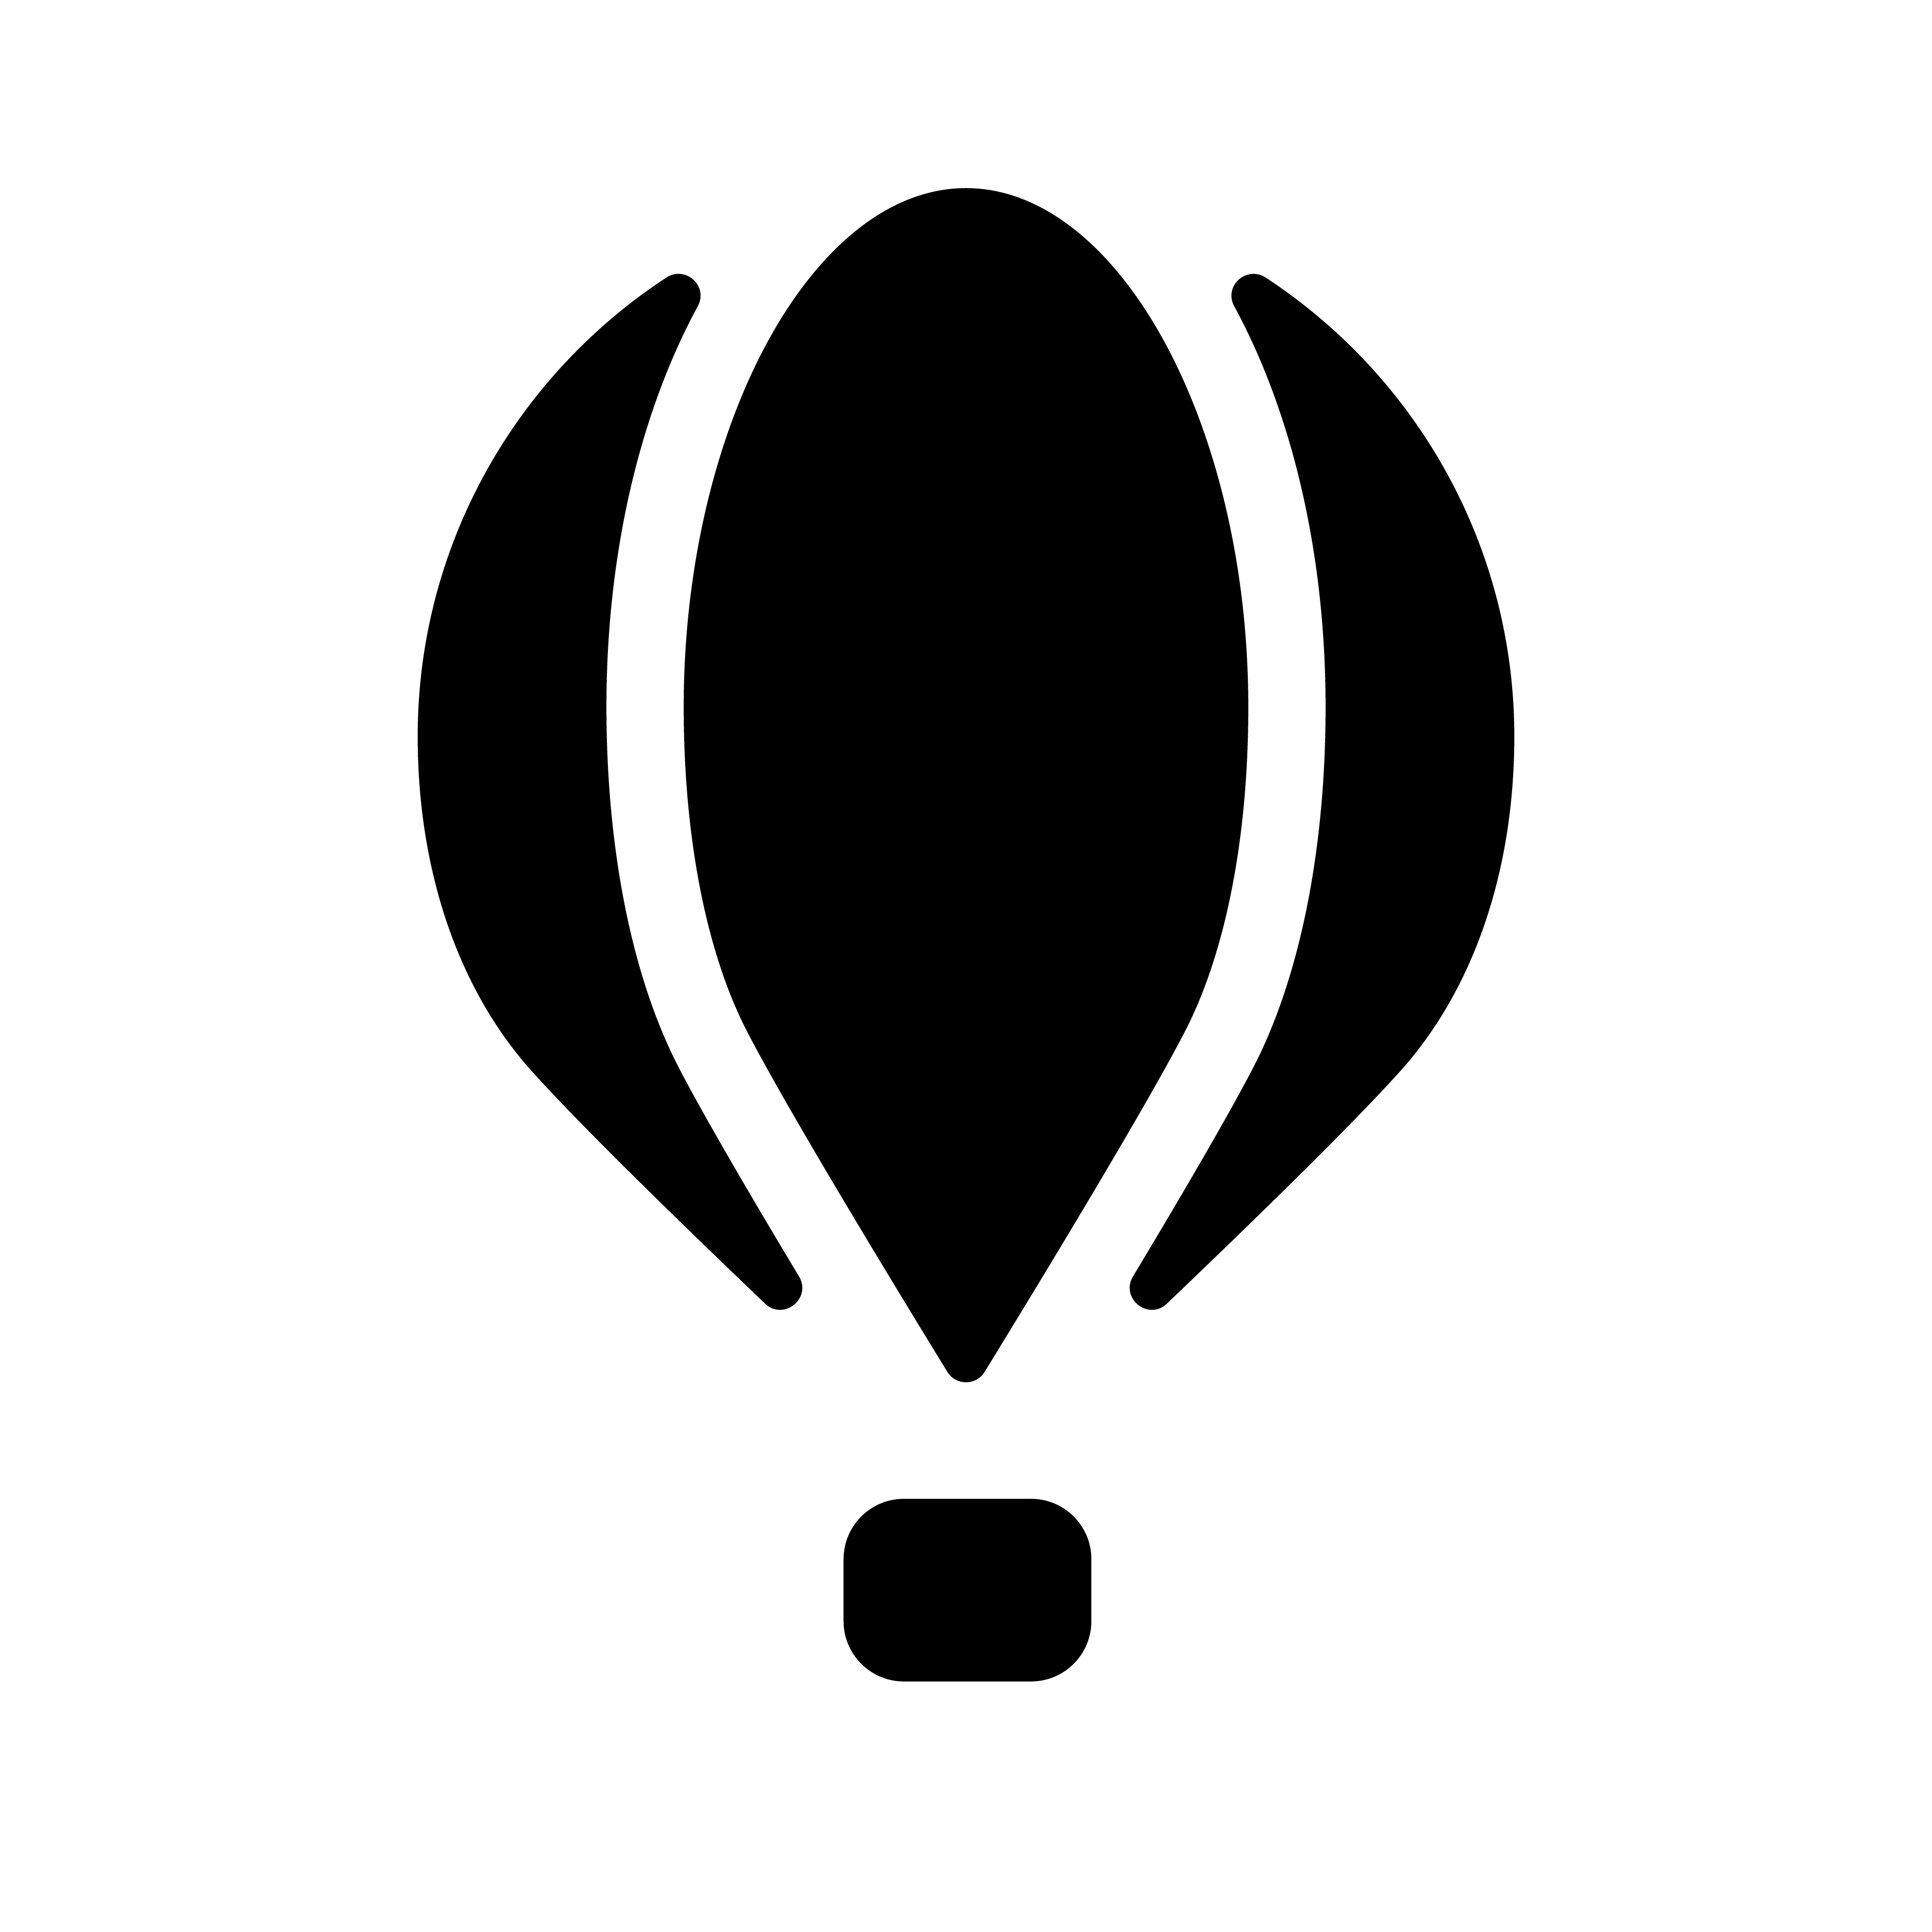 Lift Hot Air Balloons logo design by logo designer Stellen Design for your inspiration and for the worlds largest logo competition